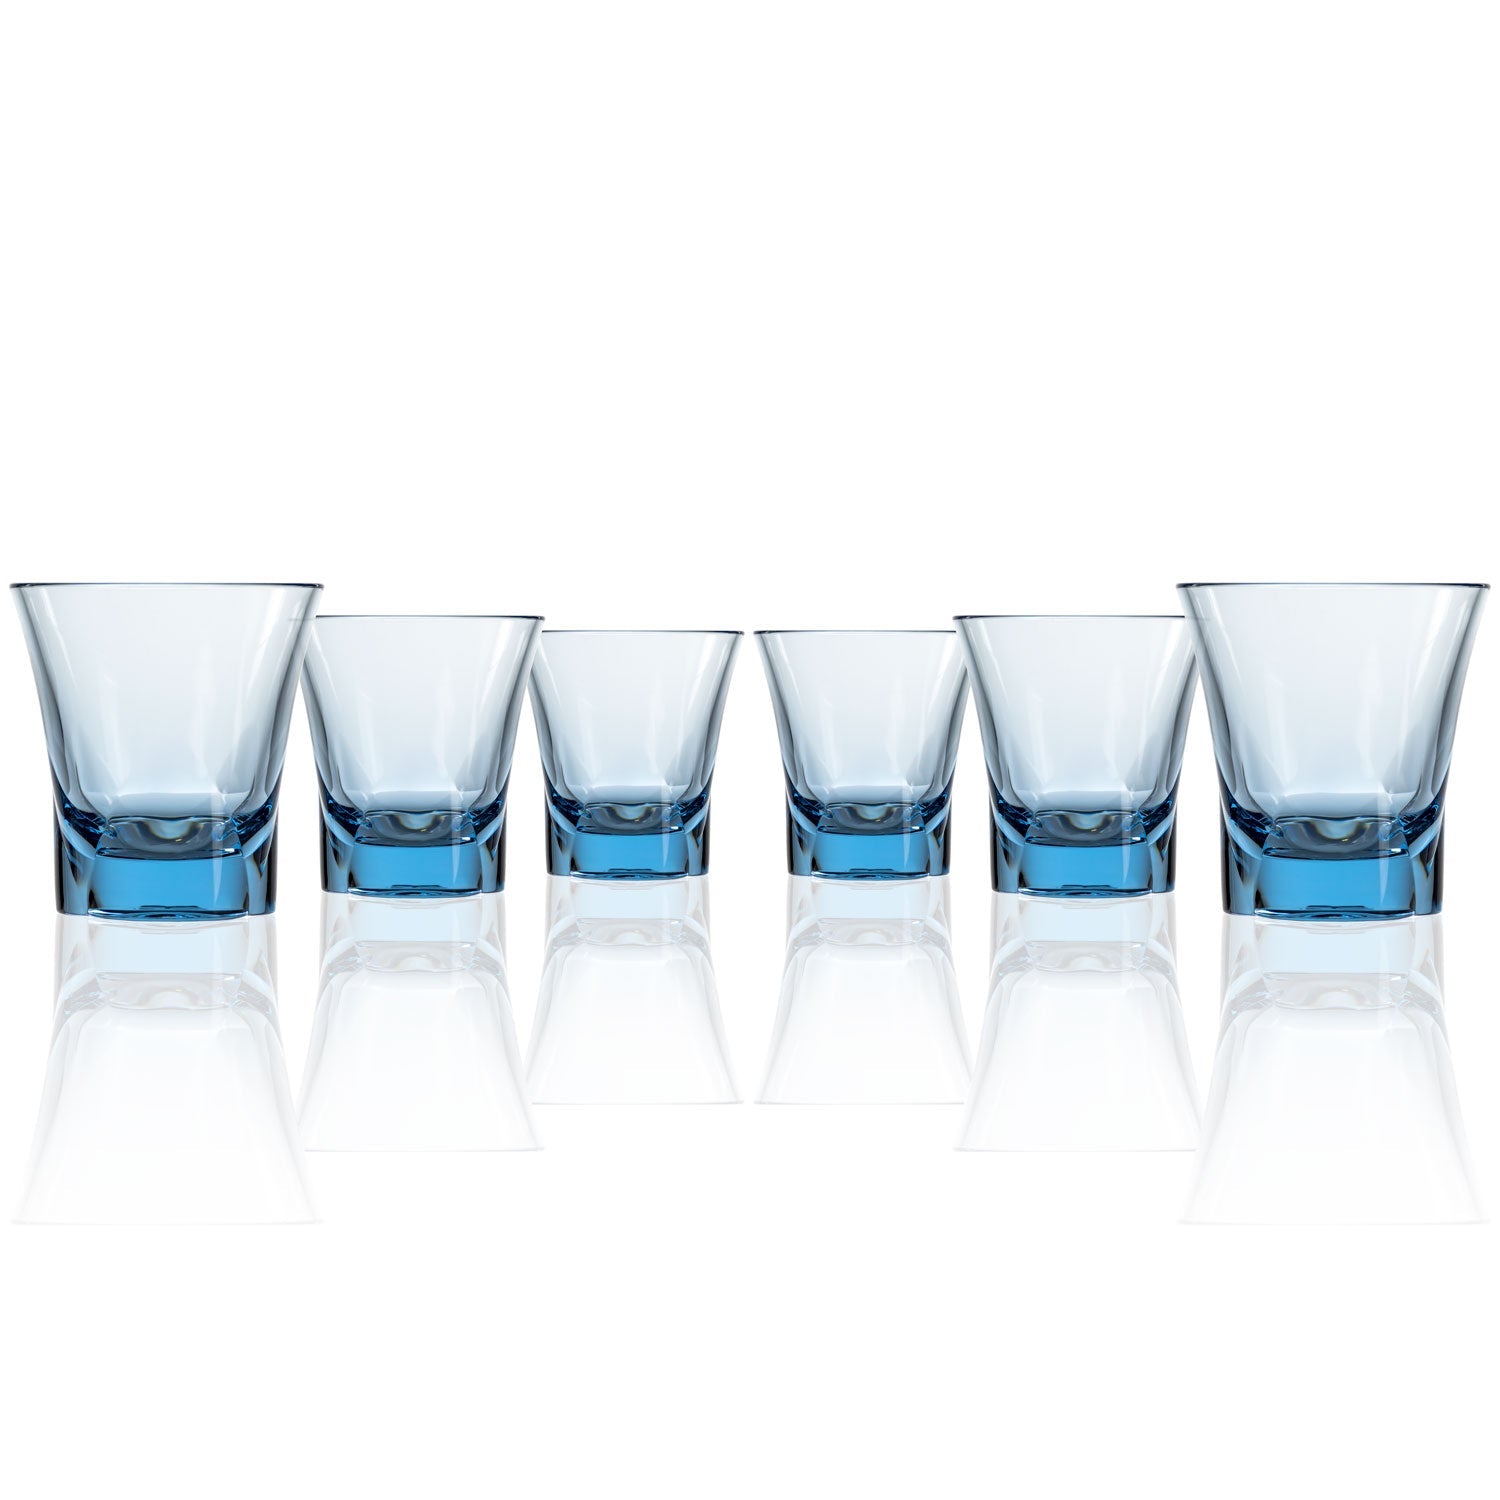 Set of 6, 10-ounce blue acrylic tumblers in the Fiori collection by Merritt Designs. Front view on white background